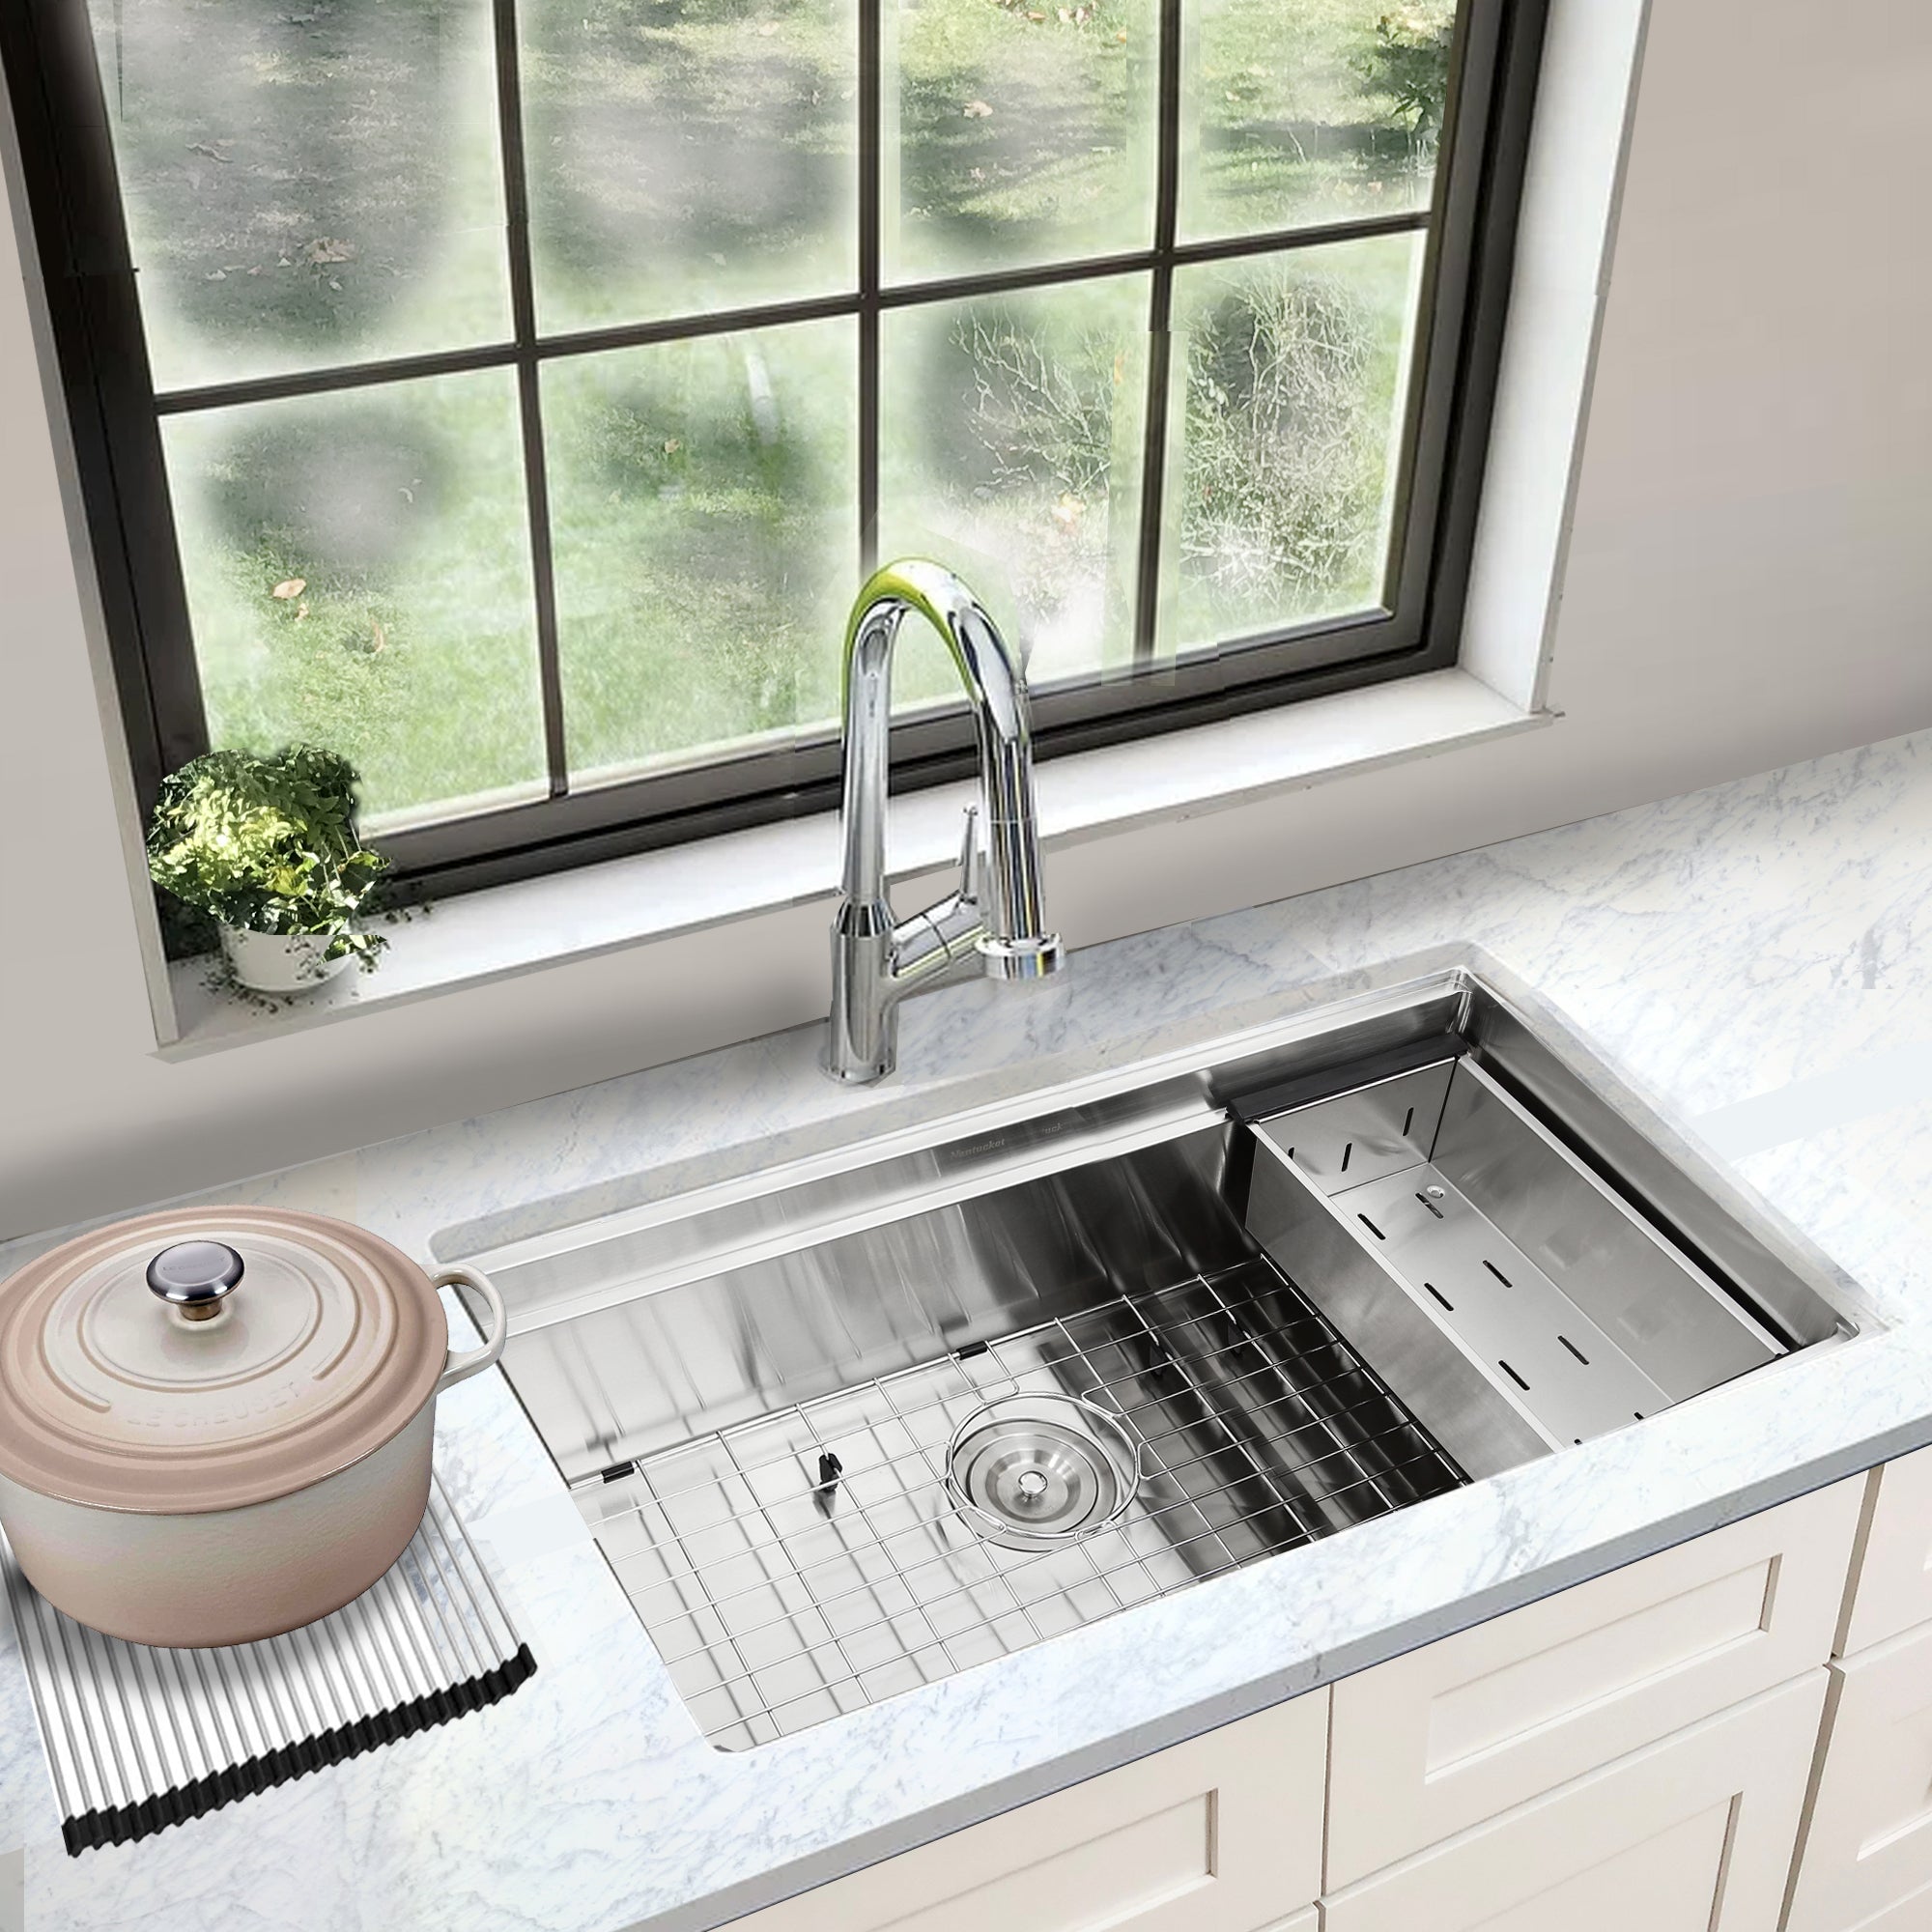 Nantucket Sinks SR-PS-3620-16 - 36" Pro Series Workstation Single Bowl Undermount Stainless Steel Kitchen Sink with Compatible Accessories